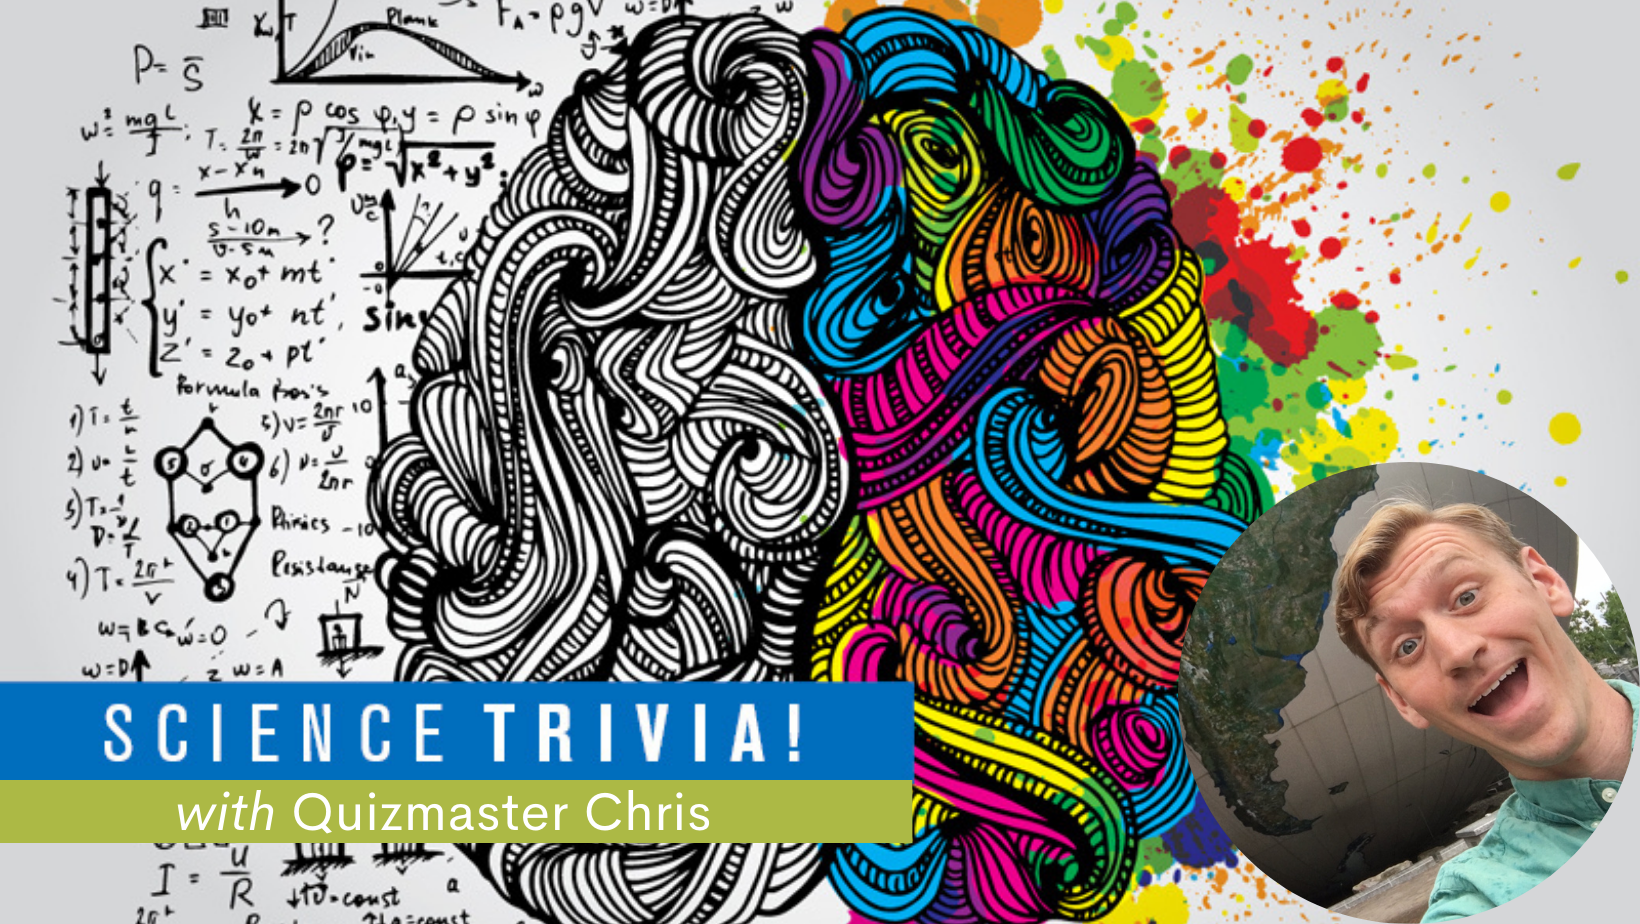 Graphic of a brain with half in black and white, surrounded by equations. Other half is in rainbow color splashes. Foreground contains text "Science trivia with Quizmaster Chris" and a photo of white male mid thirties with blonde hair smiling is in the bottom right corner.